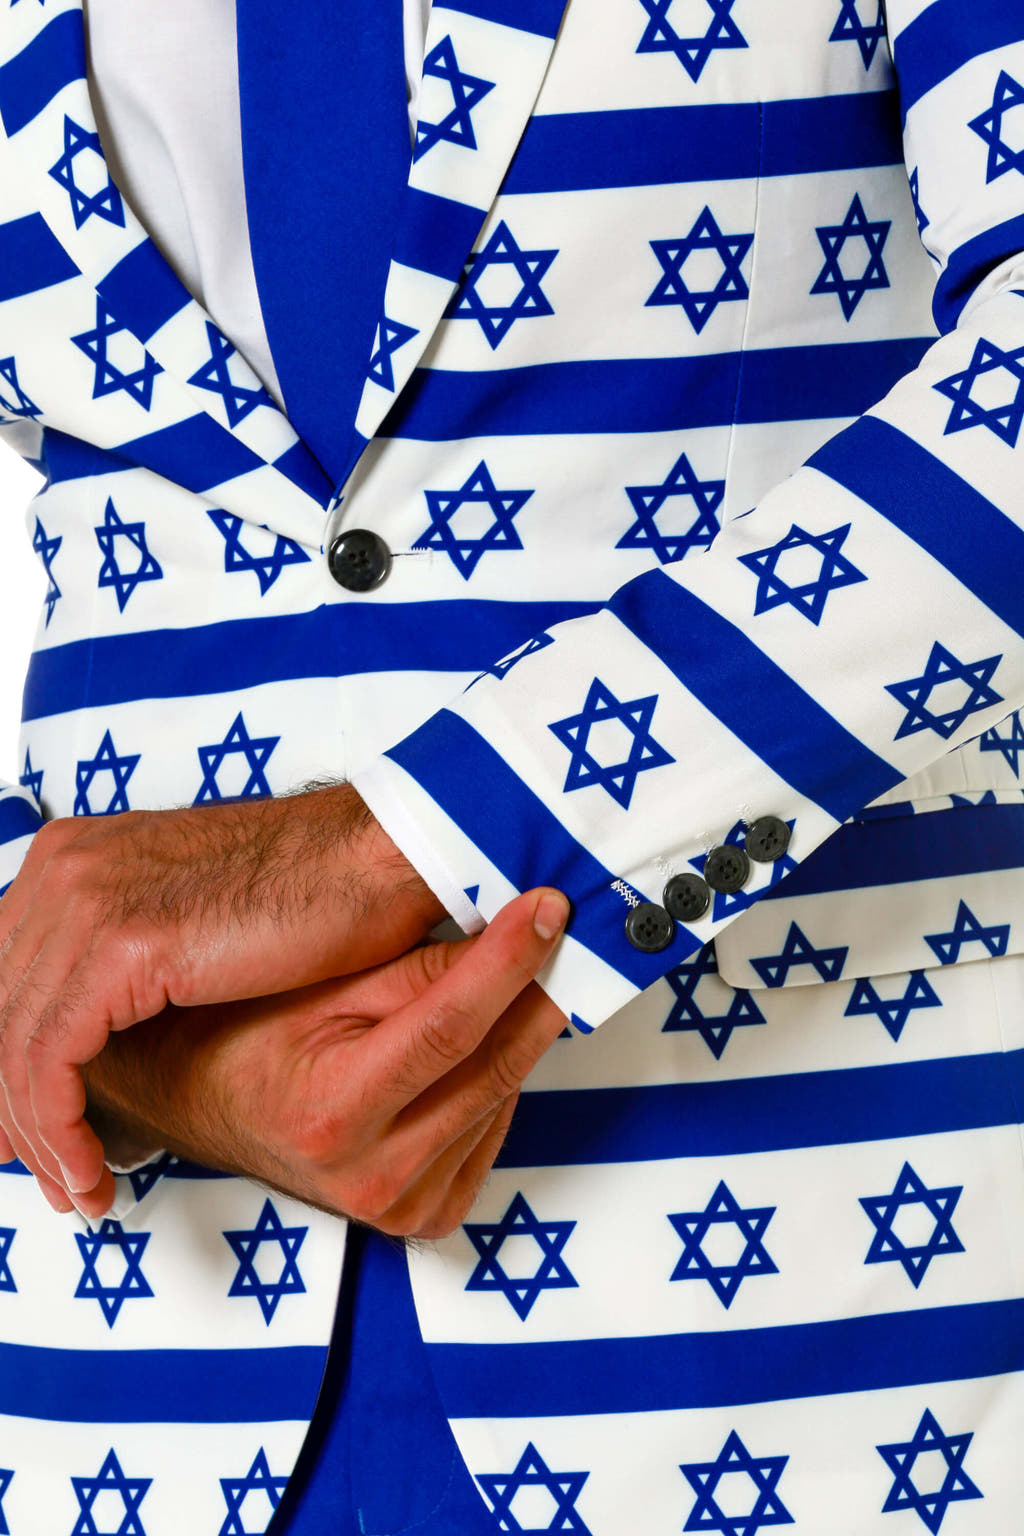 Blue and White Jewish Hanukkah Suit Cuffs and Details 